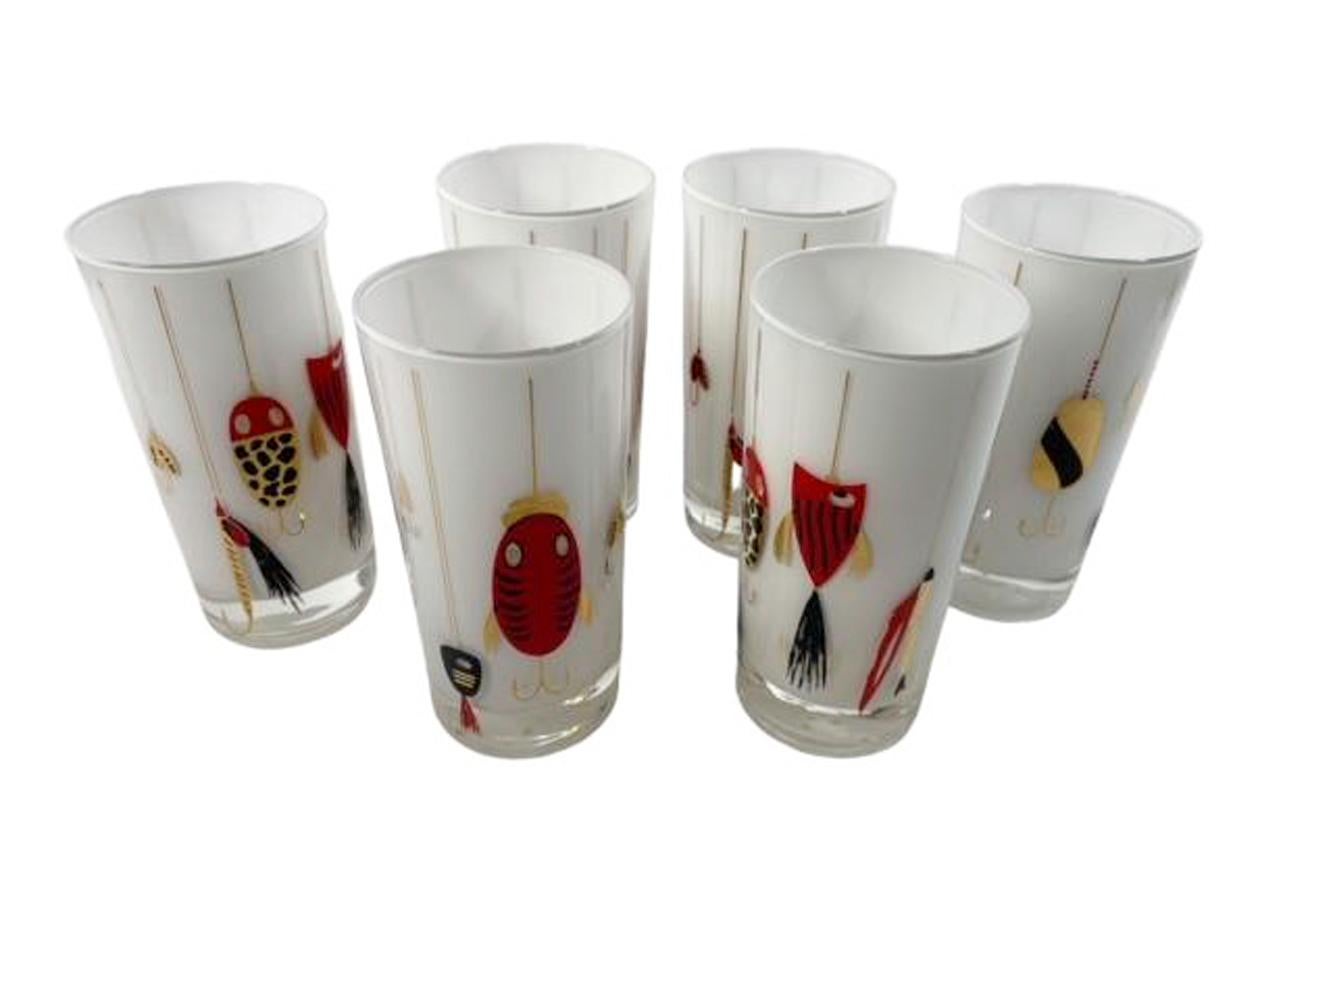 Set of six vintage highball glasses of clear glass with white frosted interior and decorated with a design by Robert Meth in 22 karat gold and colored enamels, having fishing lures hanging on gold leads with raised textured surfaces in red, black